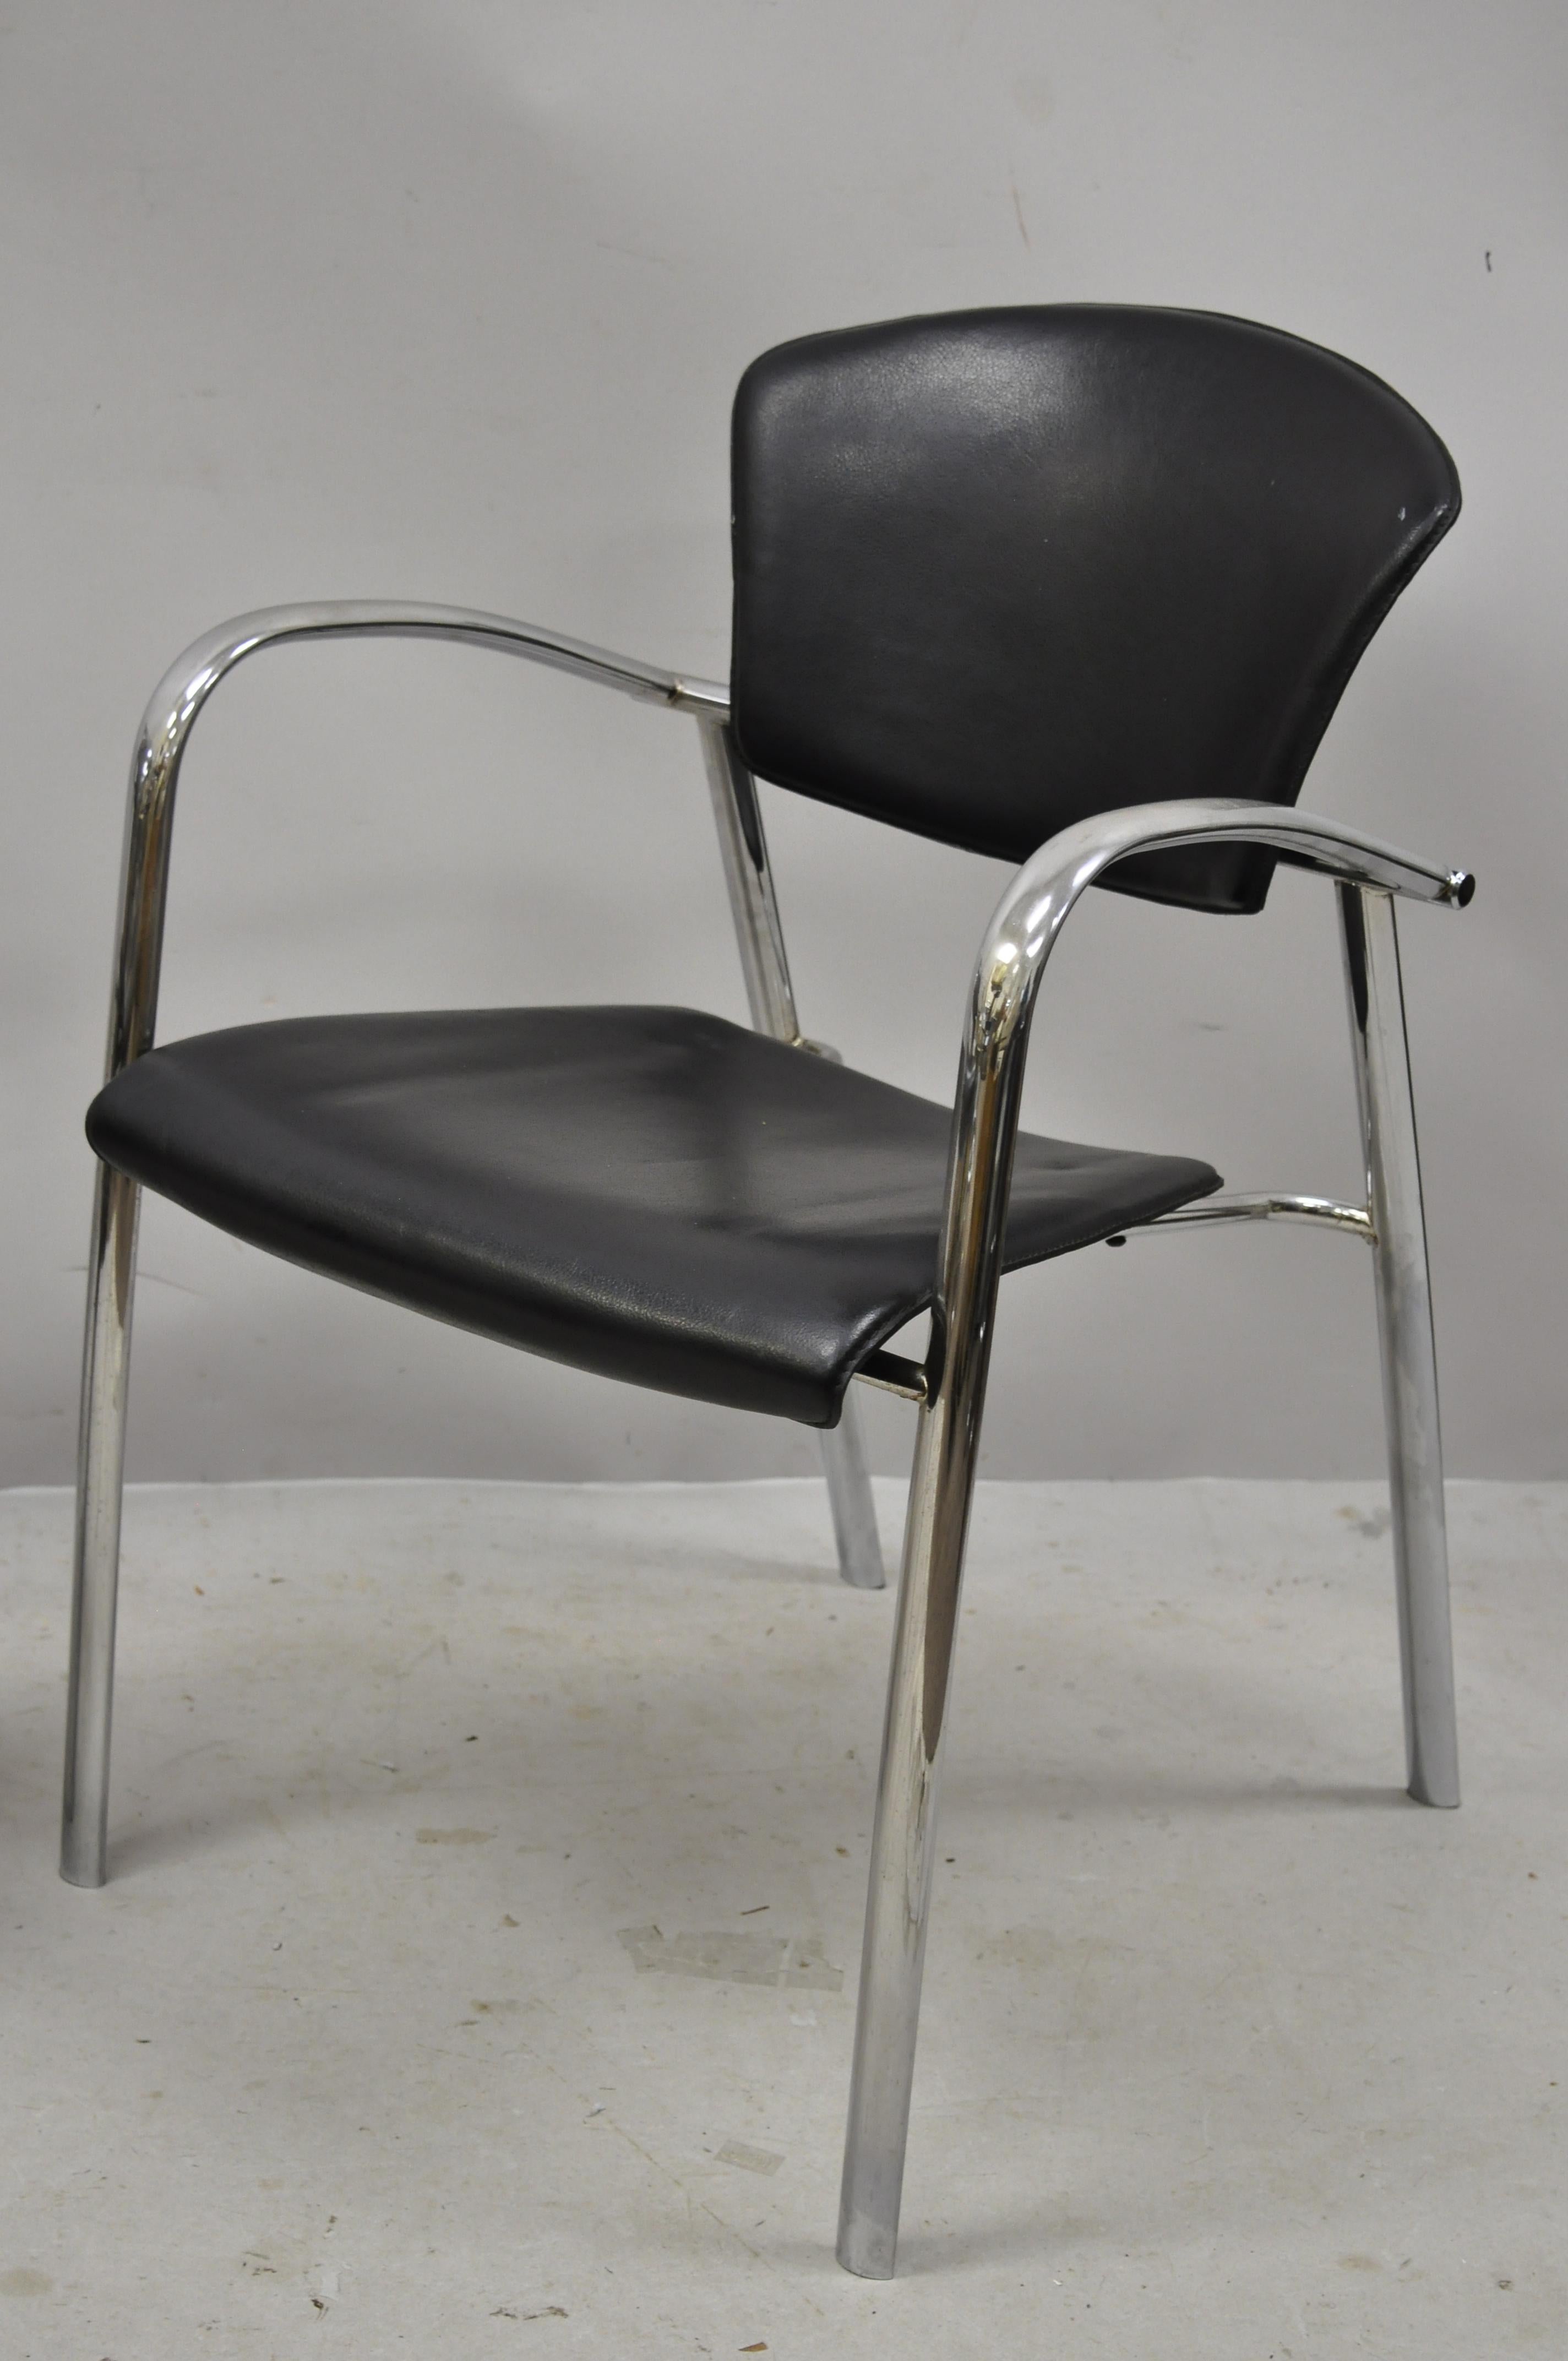 Vintage Italian Mid-Century Modern Chrome Sleek Sculptural Armchairs, a Pair In Good Condition For Sale In Philadelphia, PA